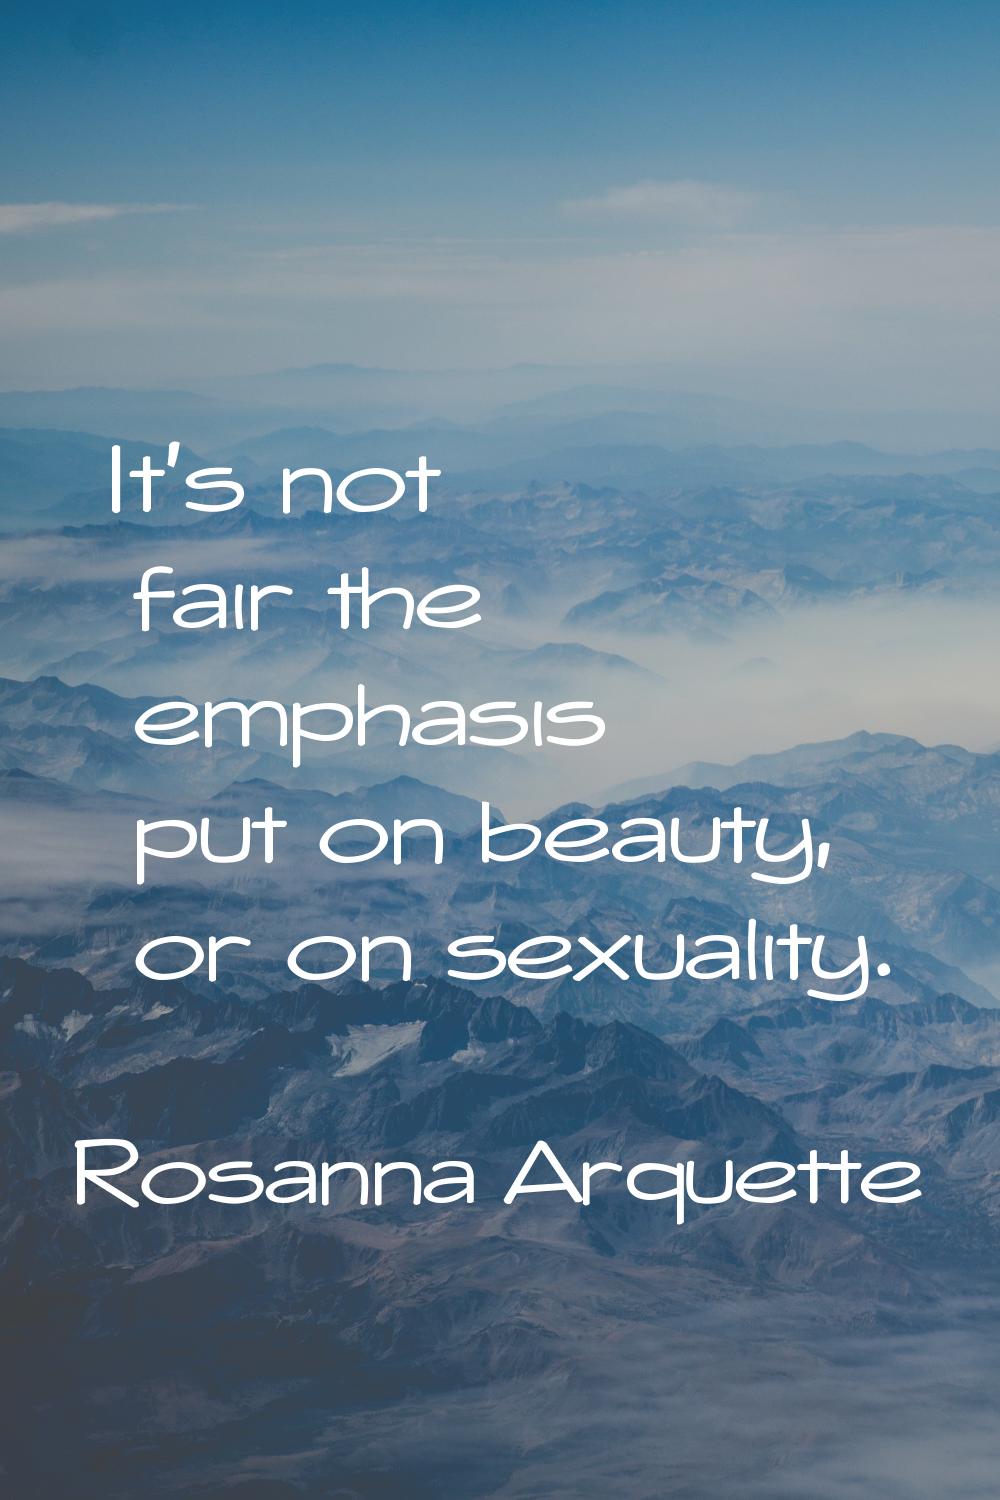 It's not fair the emphasis put on beauty, or on sexuality.